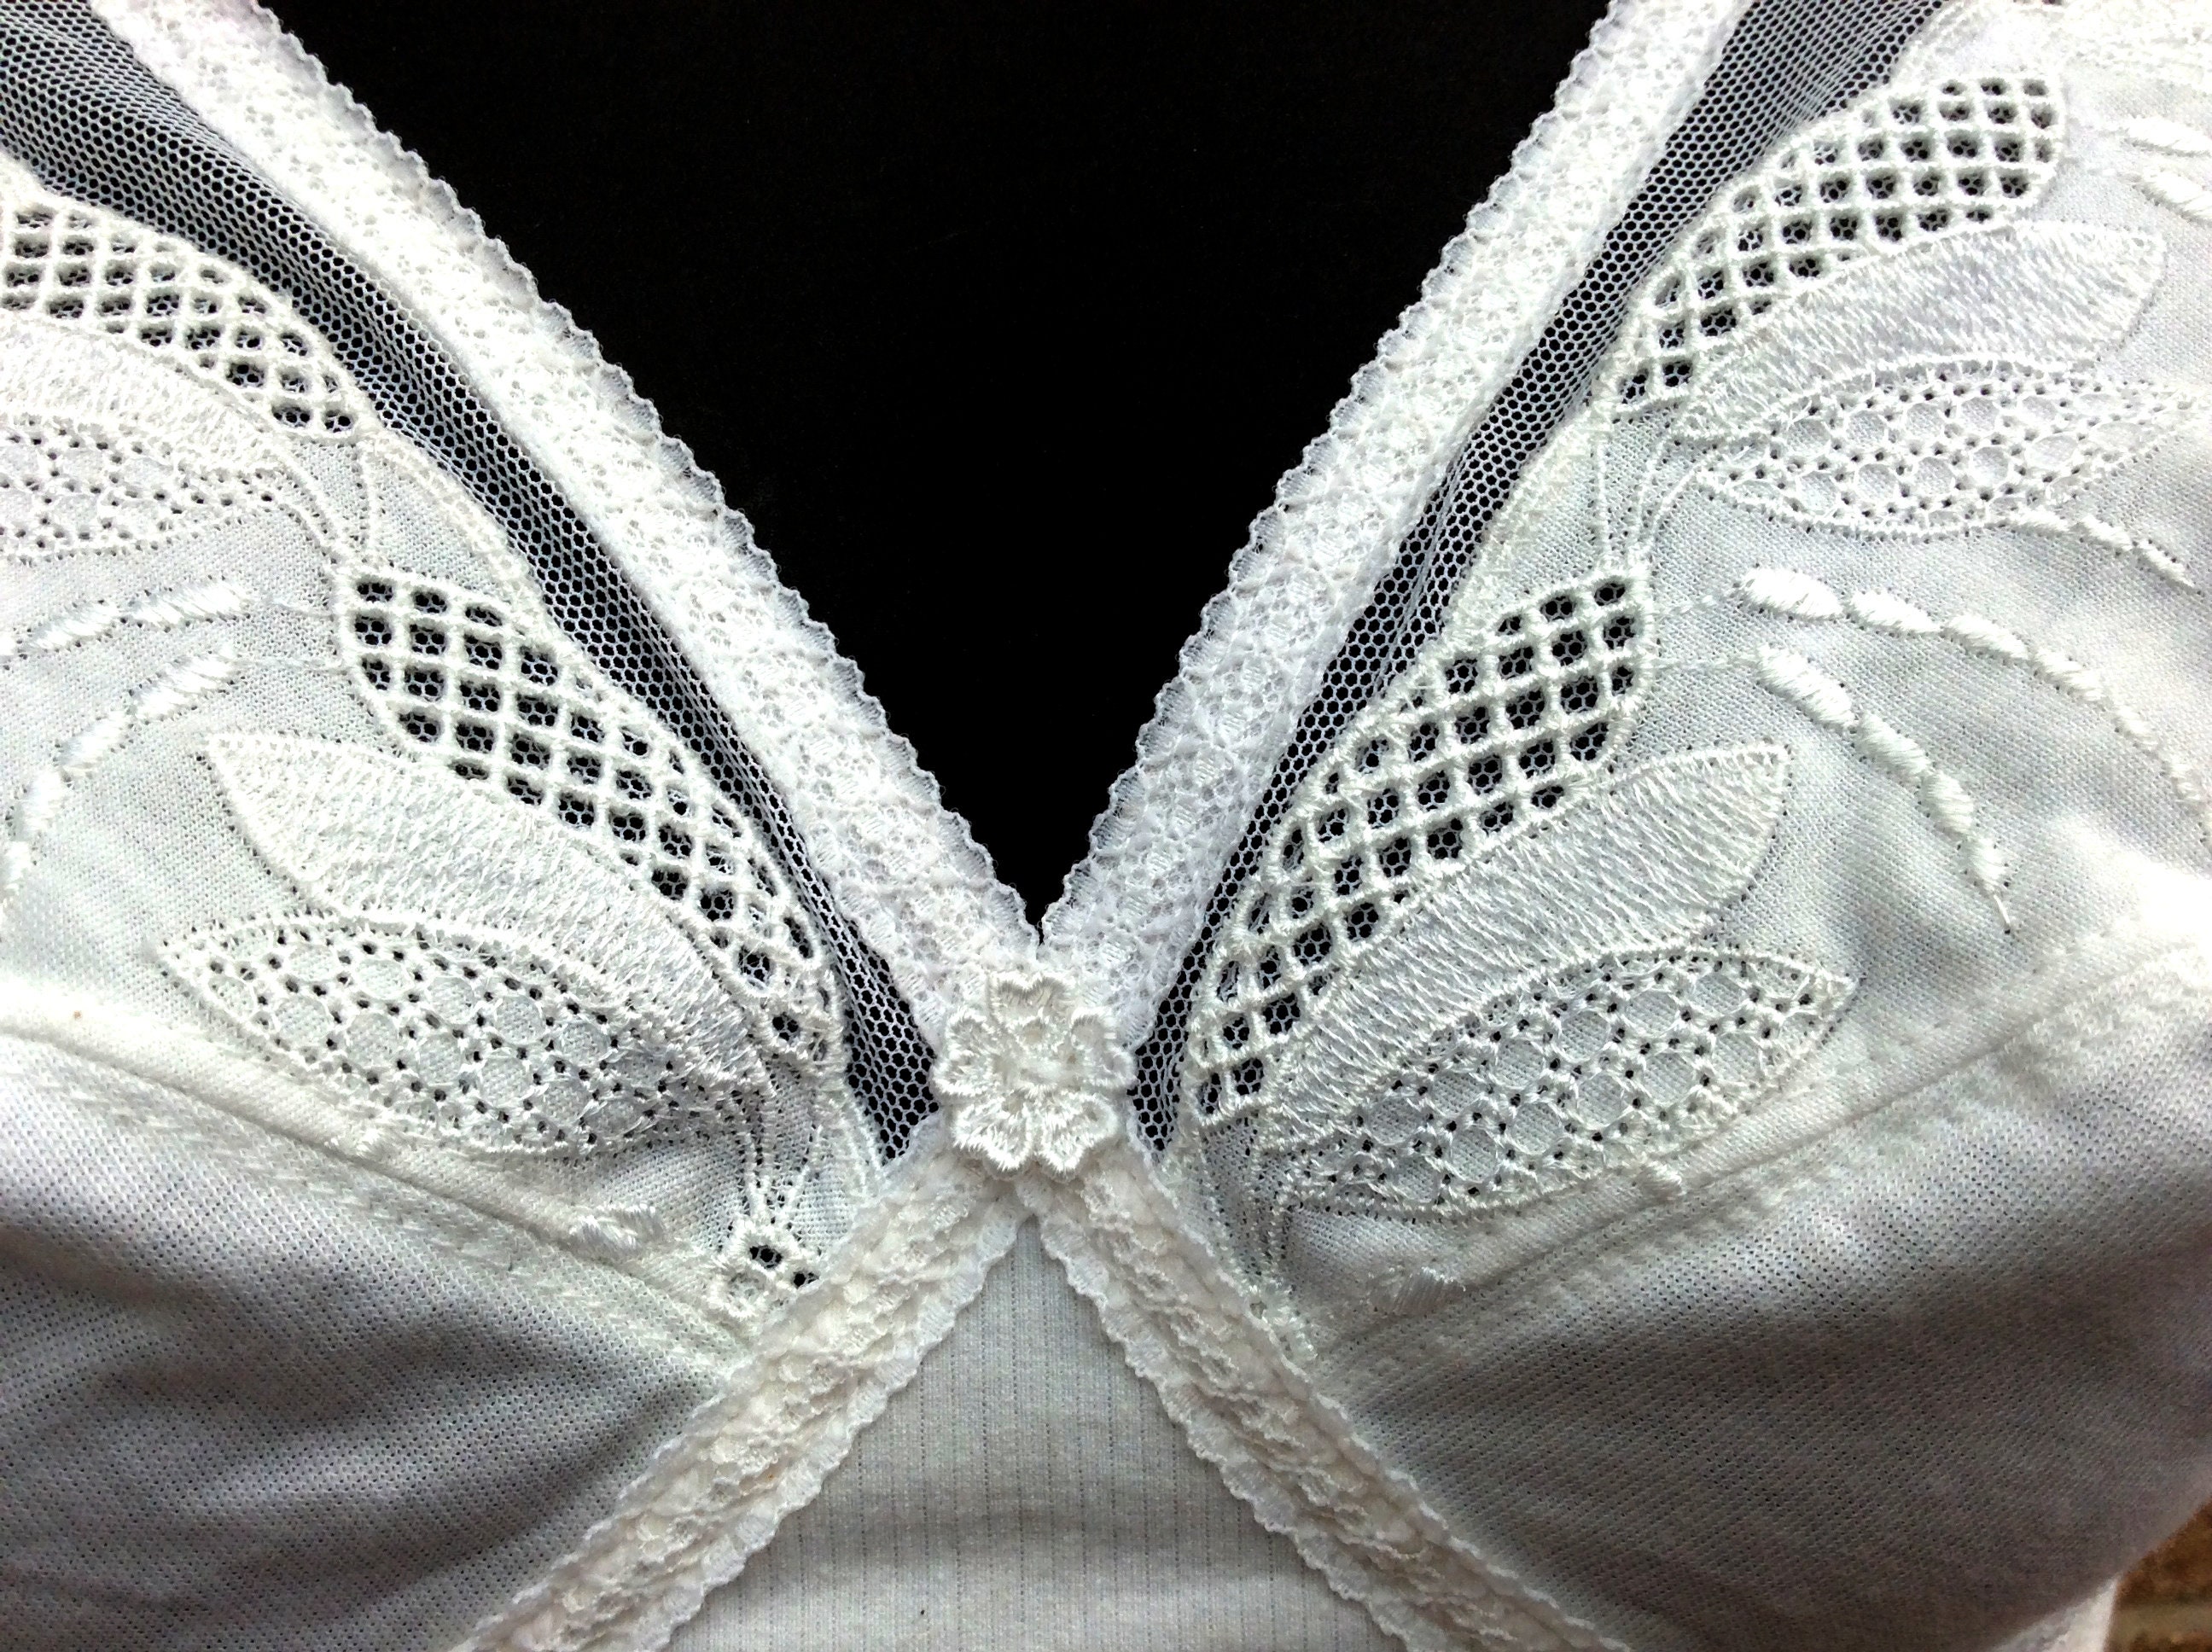 Vintage Playtex Corselette Girdle Bodysuit 34B Corset White Cotton 80s Lace  Mesh Peek-a-boo Embroidery Detail Hook Closure Burlesque Pin Up -   Canada